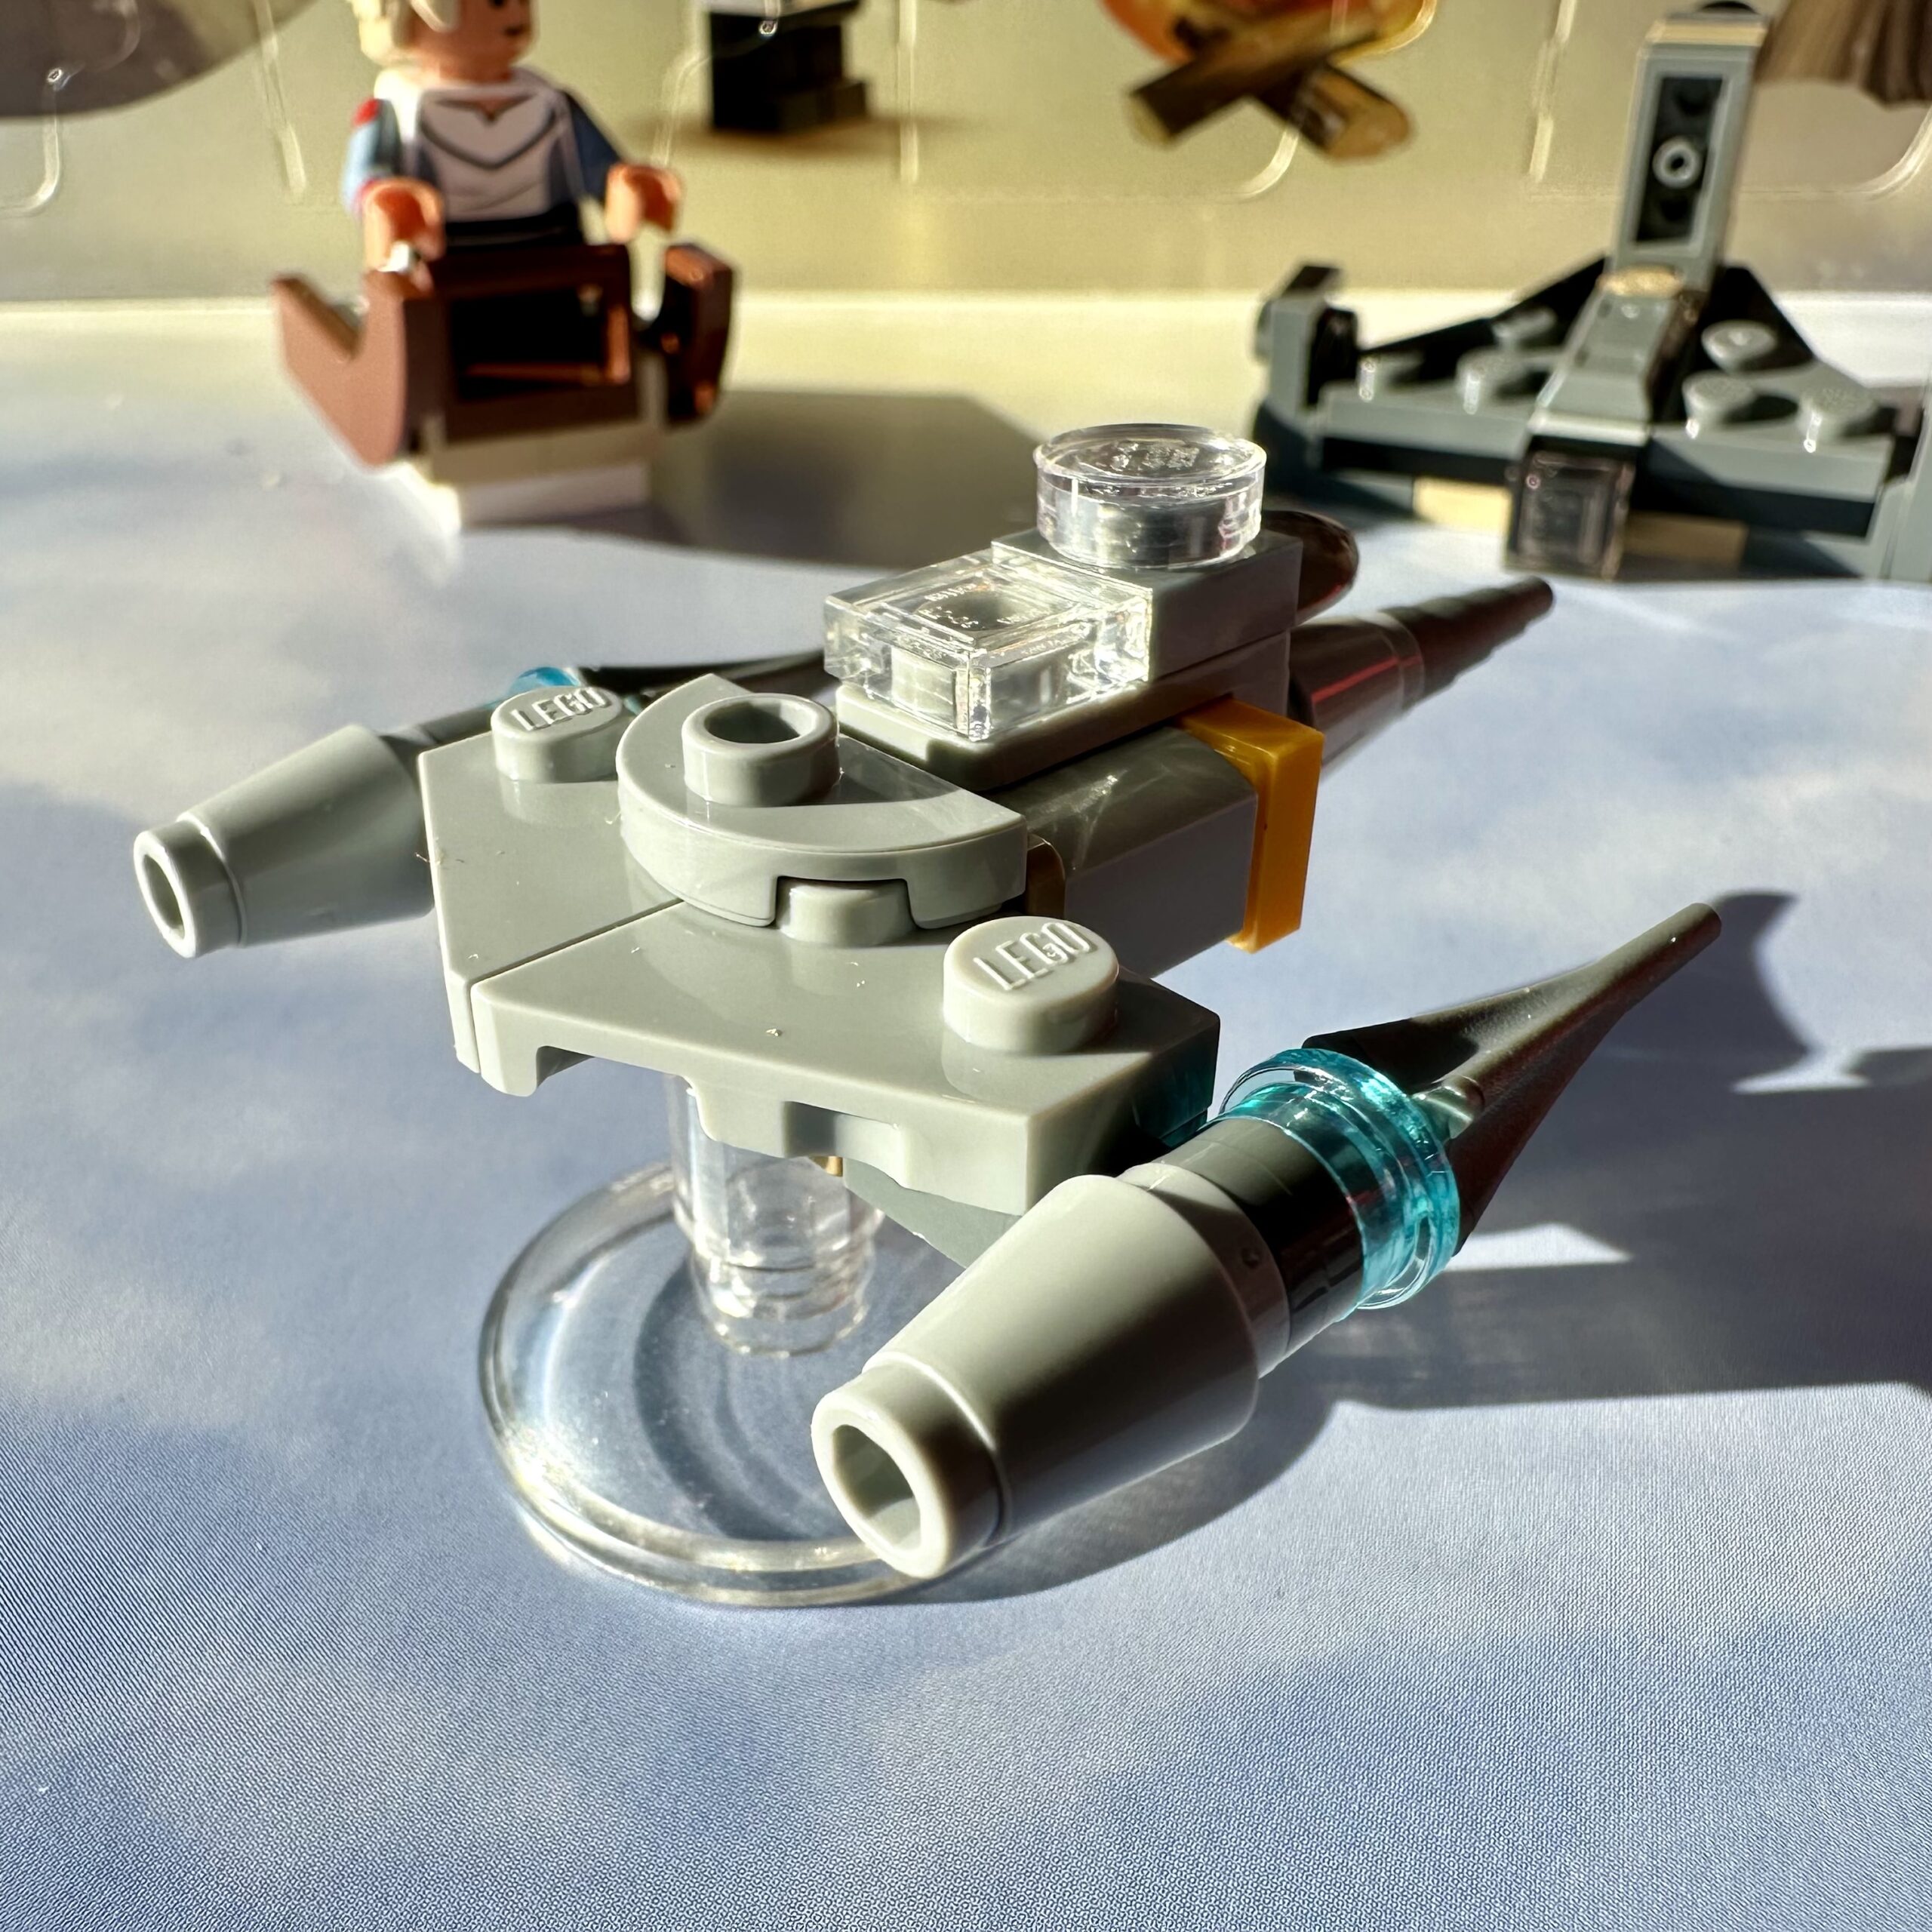 Mini LEGO build of the Mandalorian's N-1 Starfighter. It's mostly made of light gray parts and has a sleek shape.